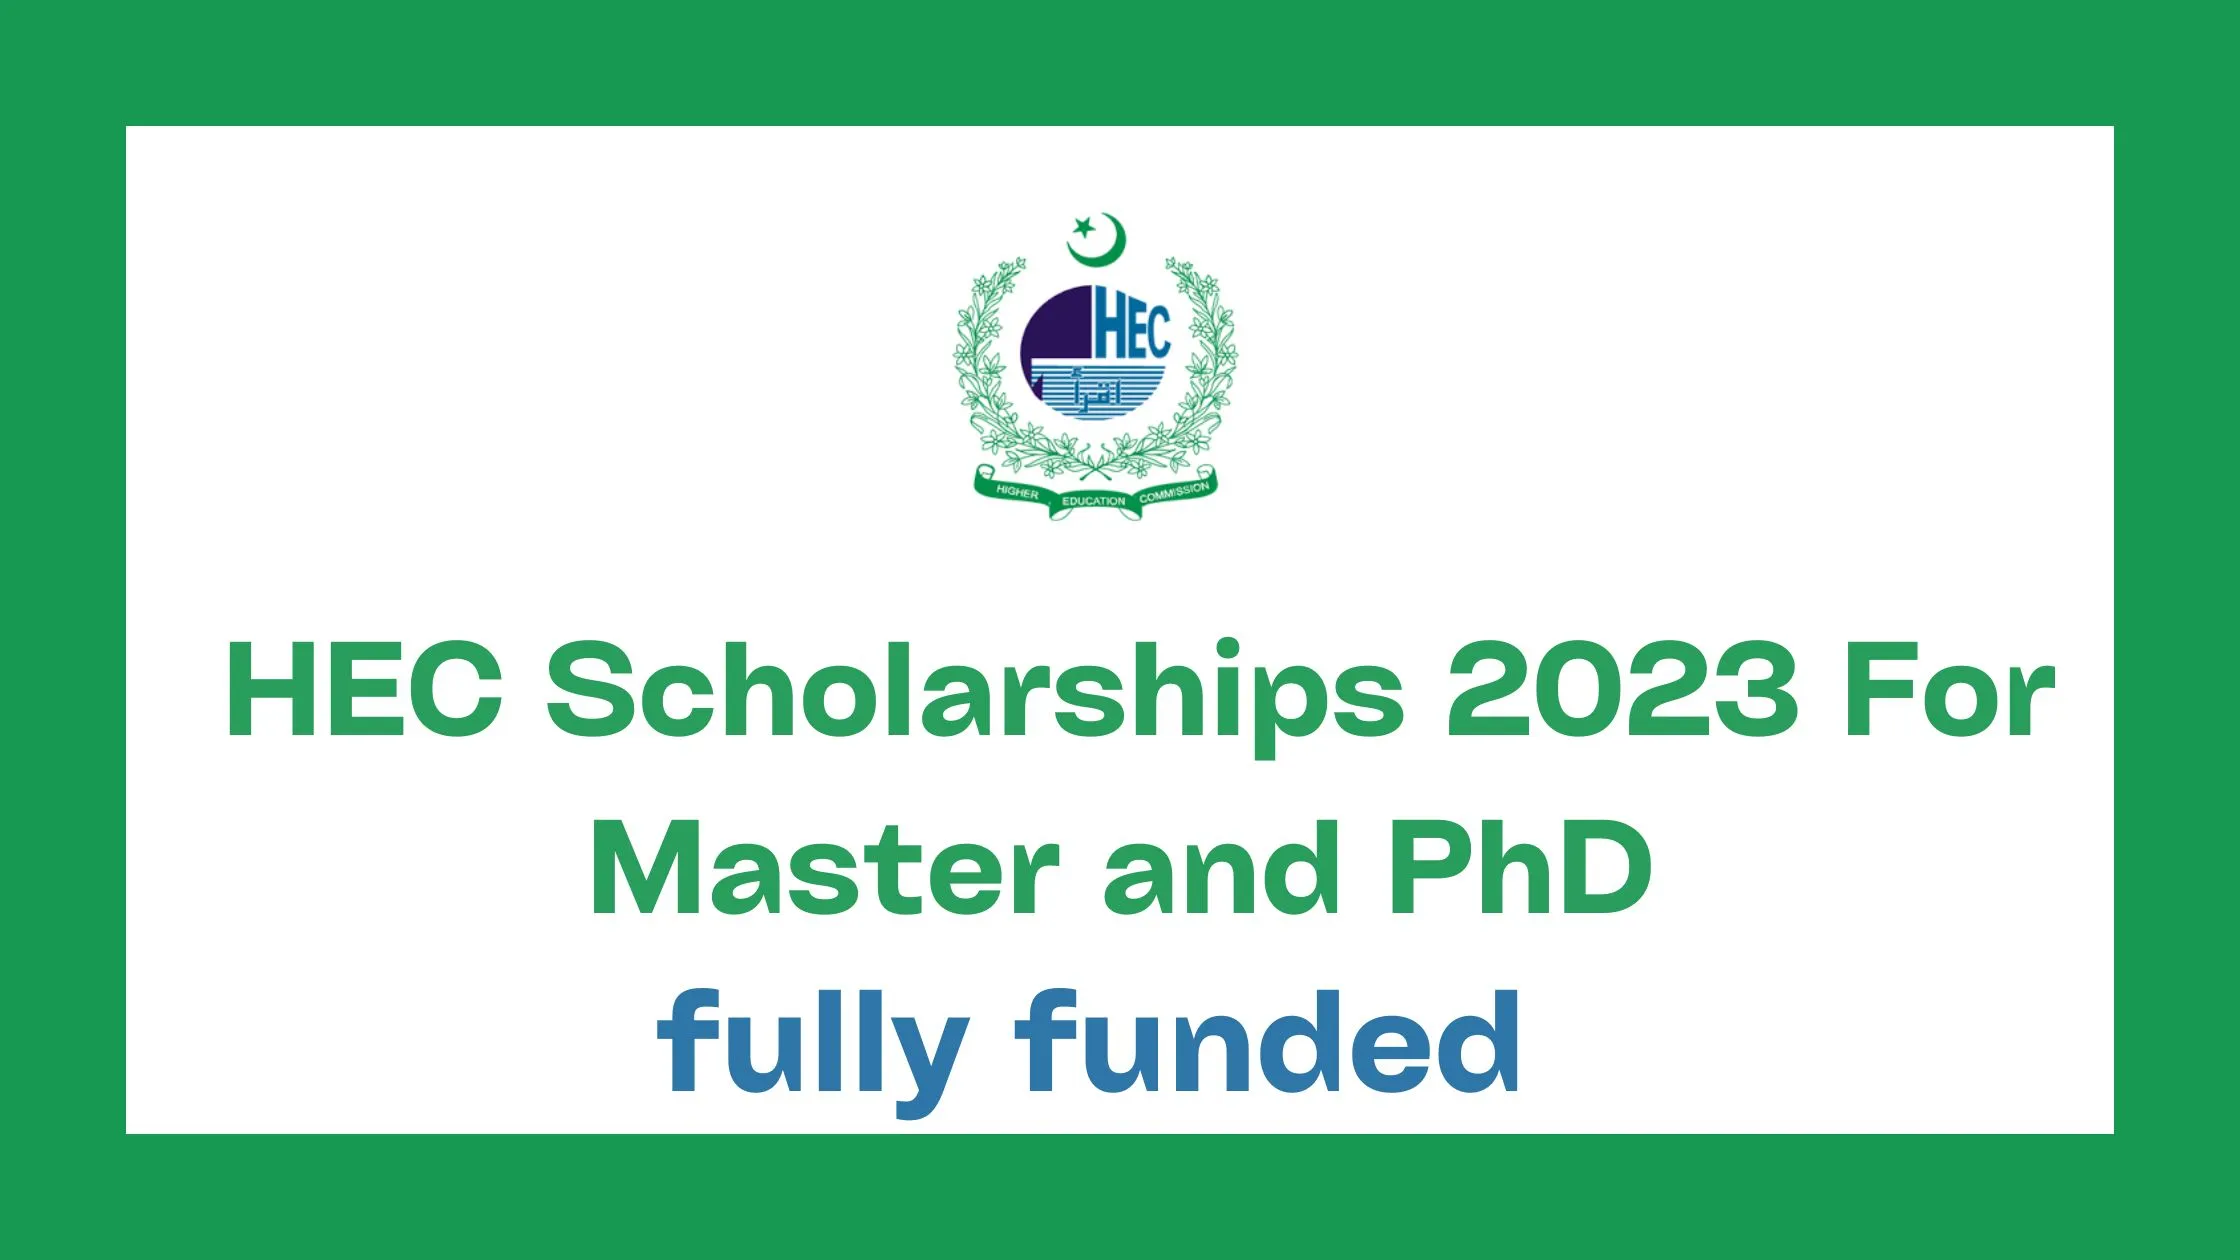 HEC Scholarships 2023 For Master and PhD